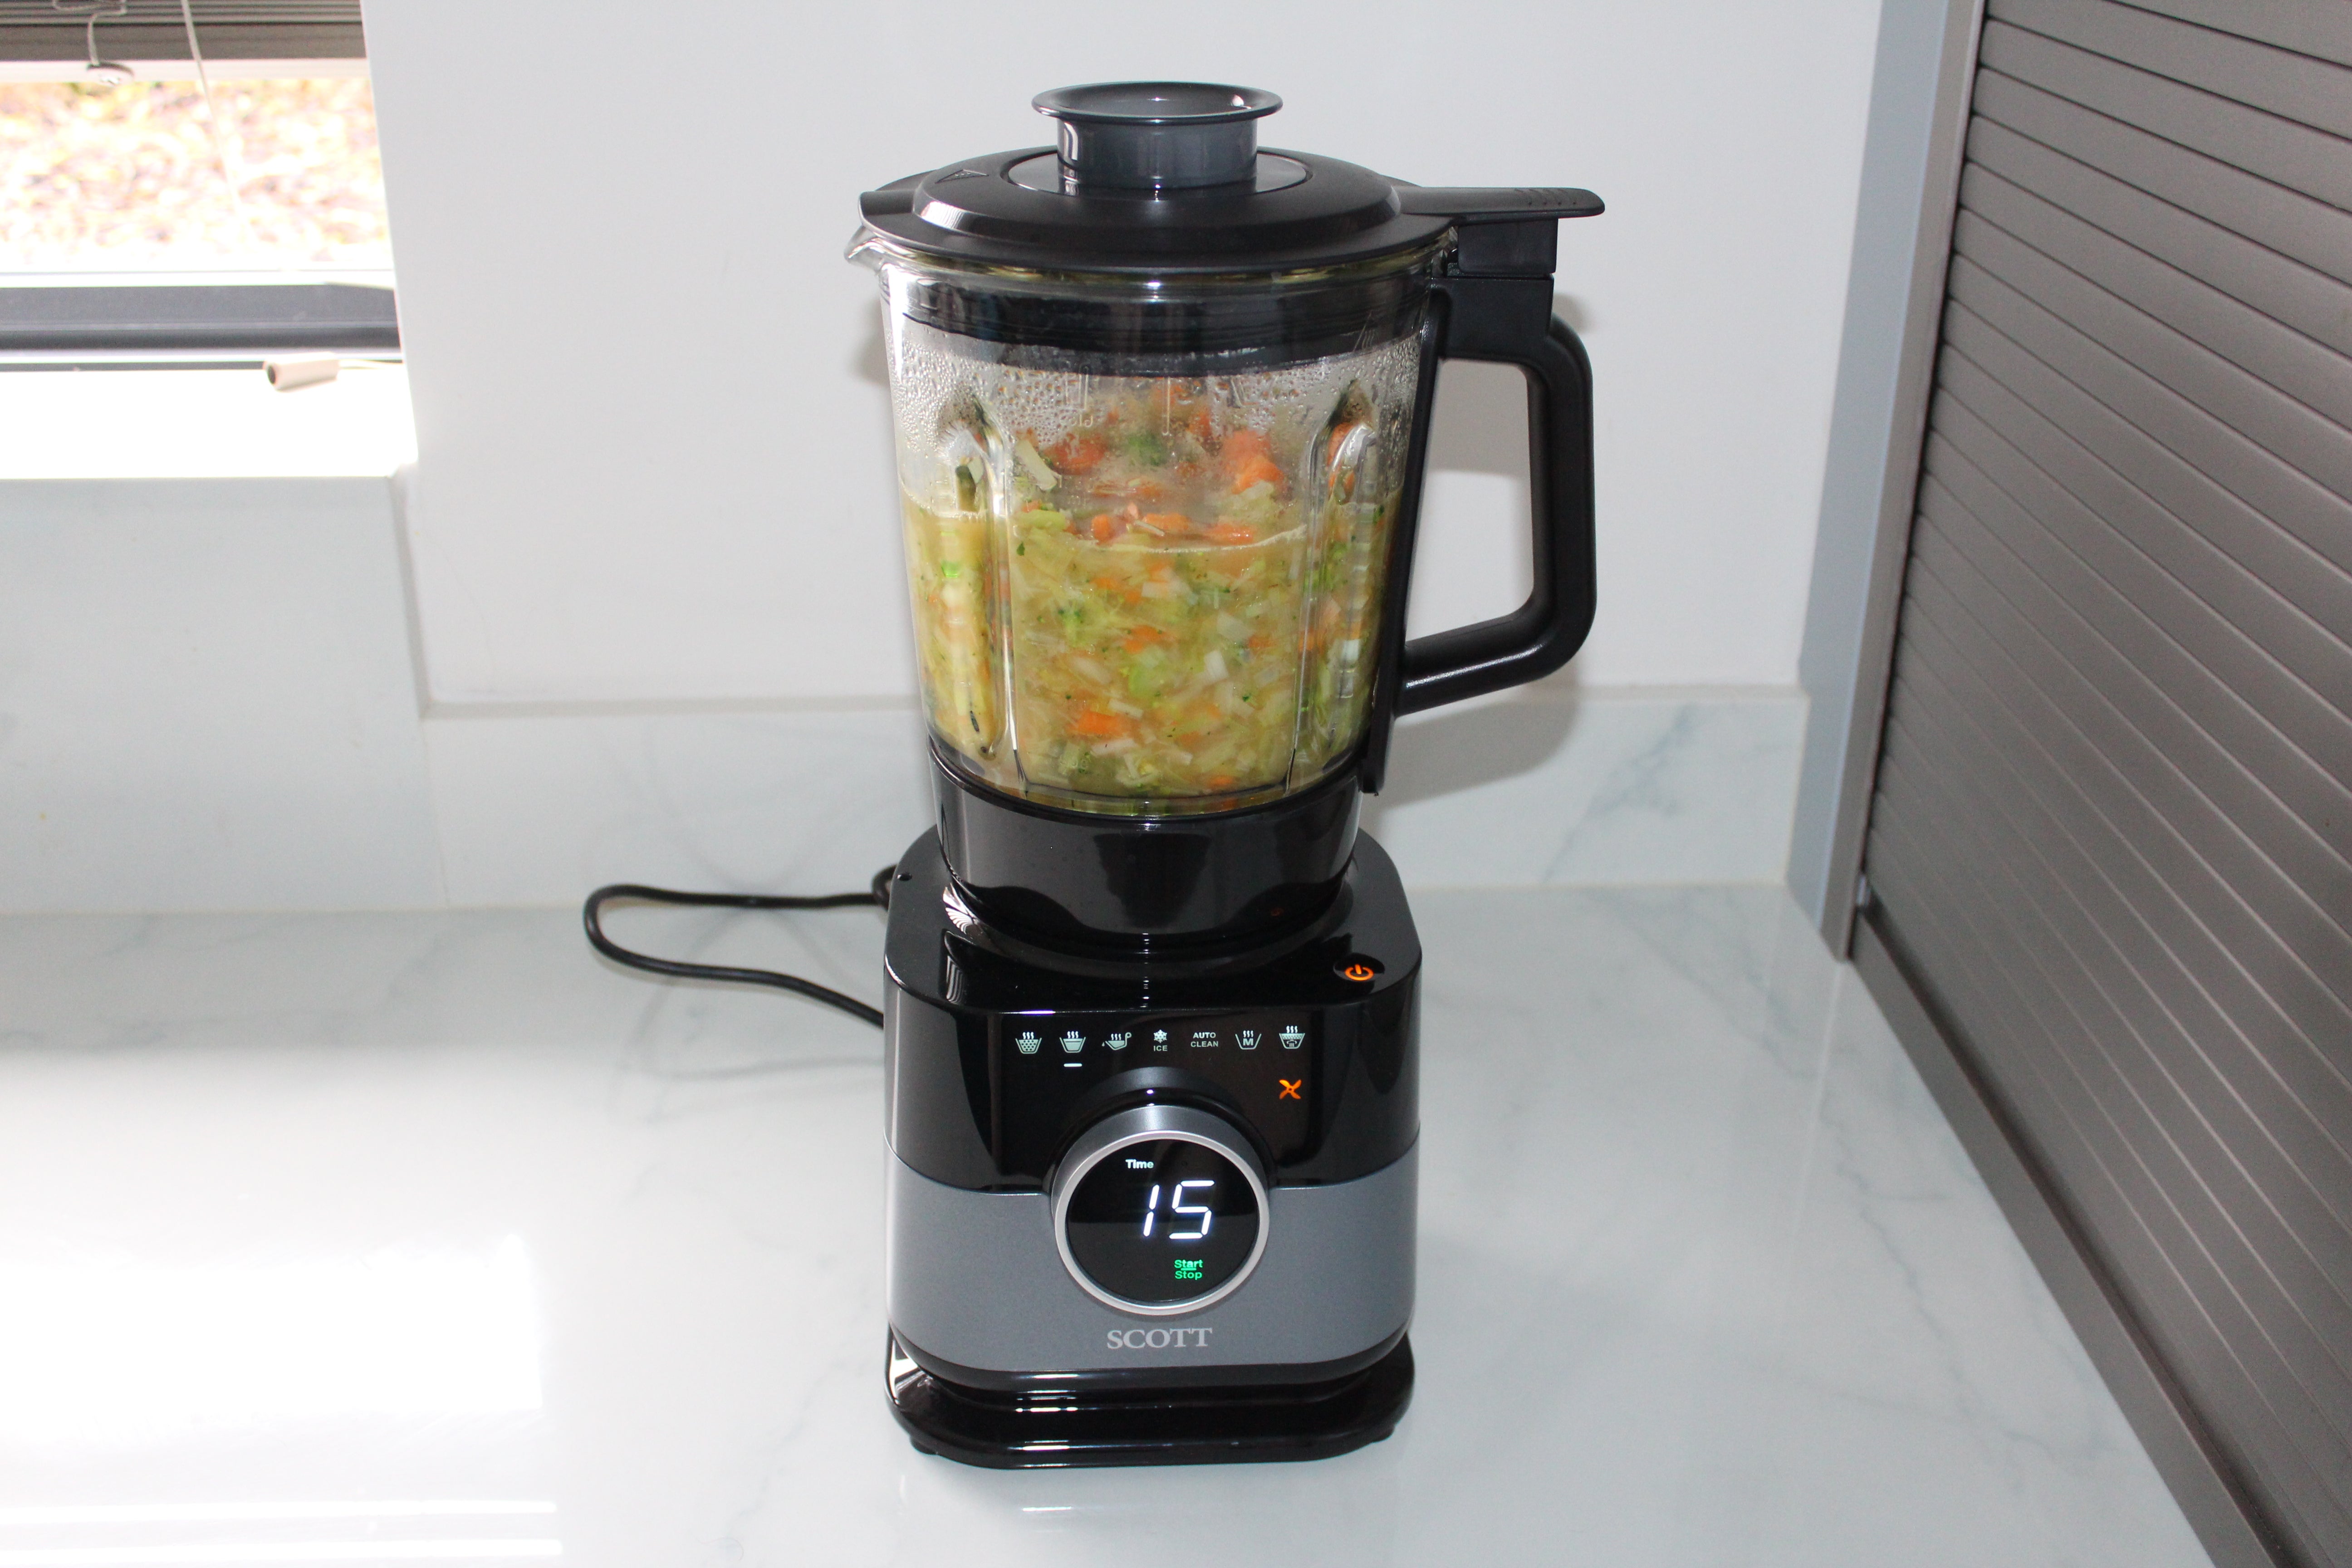 Scott Simplissimo Chef Cook Blender with vegetables on kitchen counter.